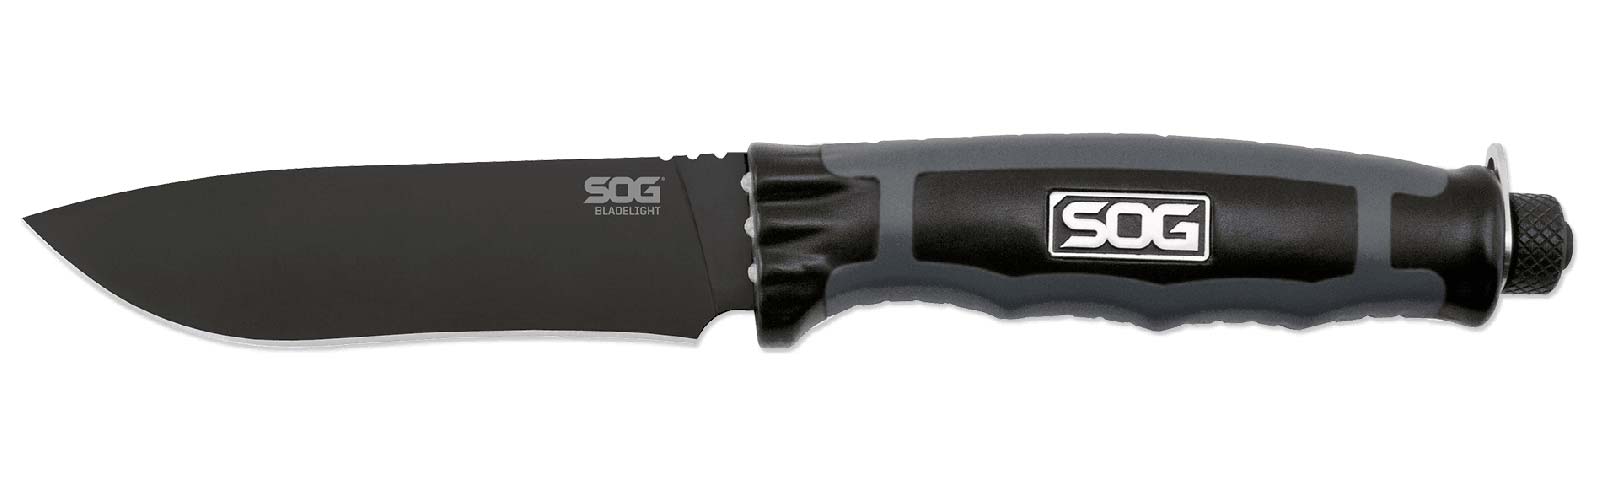 SOG BladeLight Tactical Knife Review